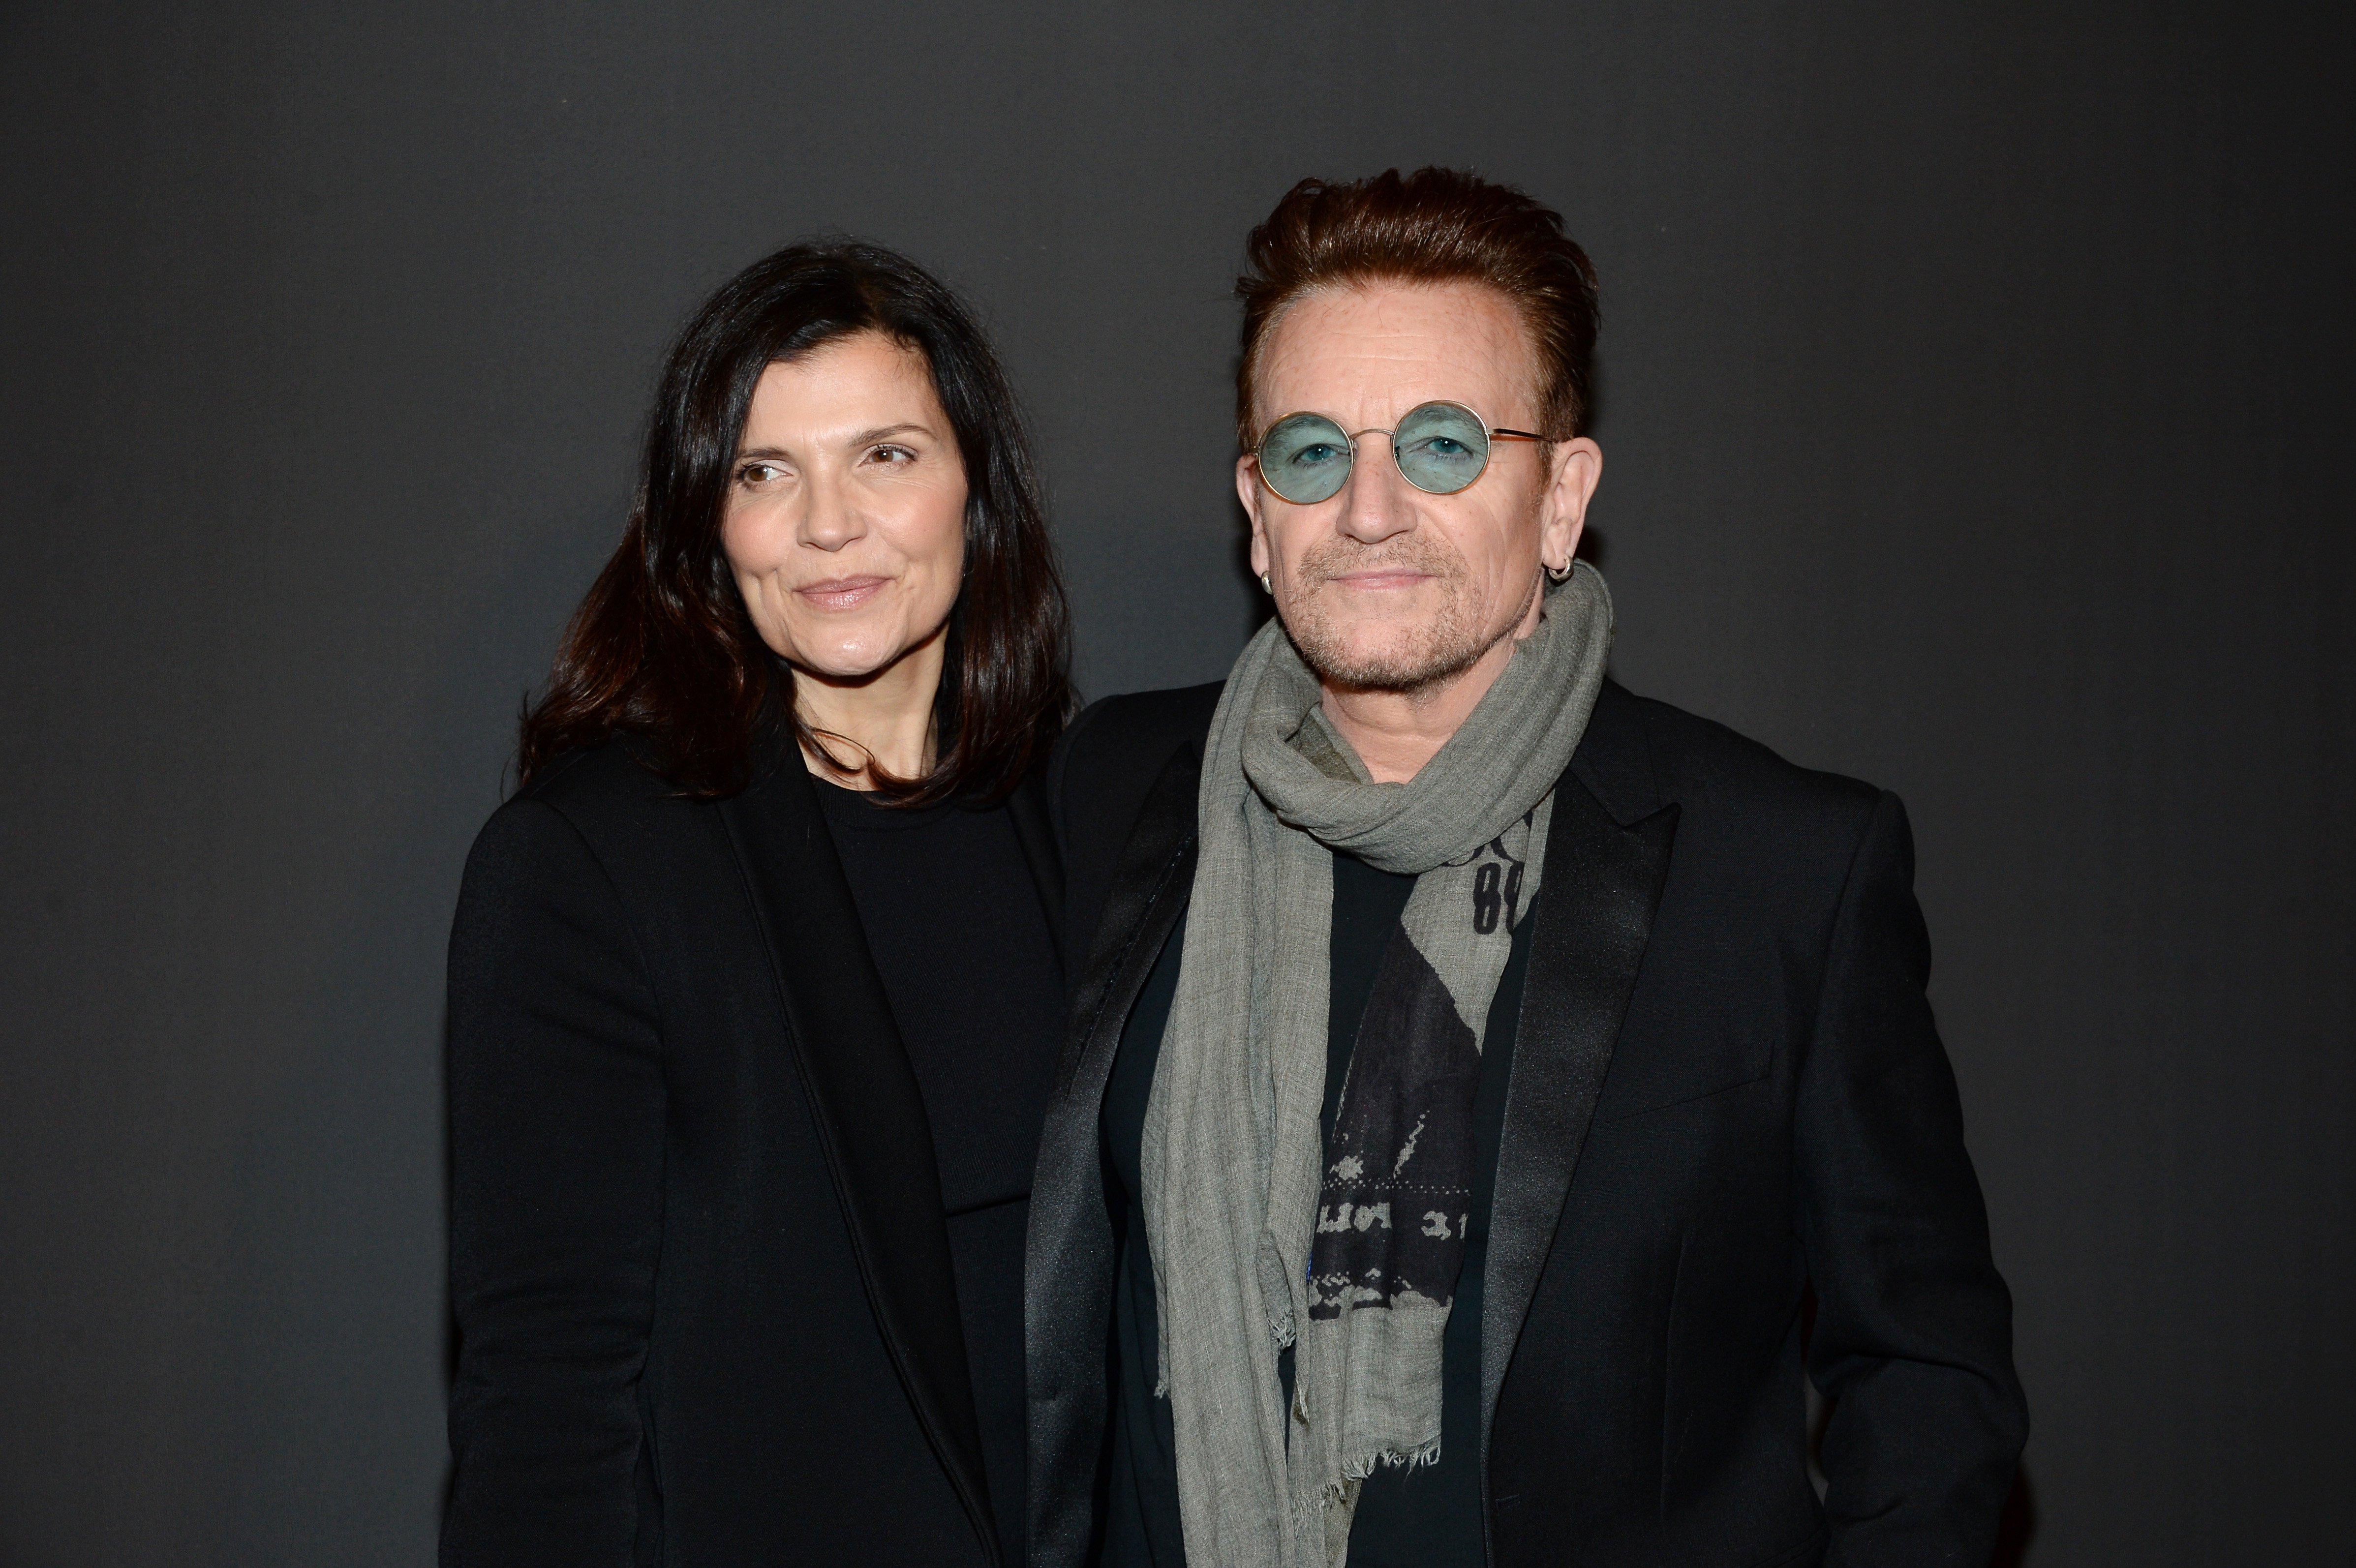 Bono and Ali Hewson at the Dior Homme Menswear Fall/Winter 2017-2018 show on January 21, 2017 | Photo: Getty Images